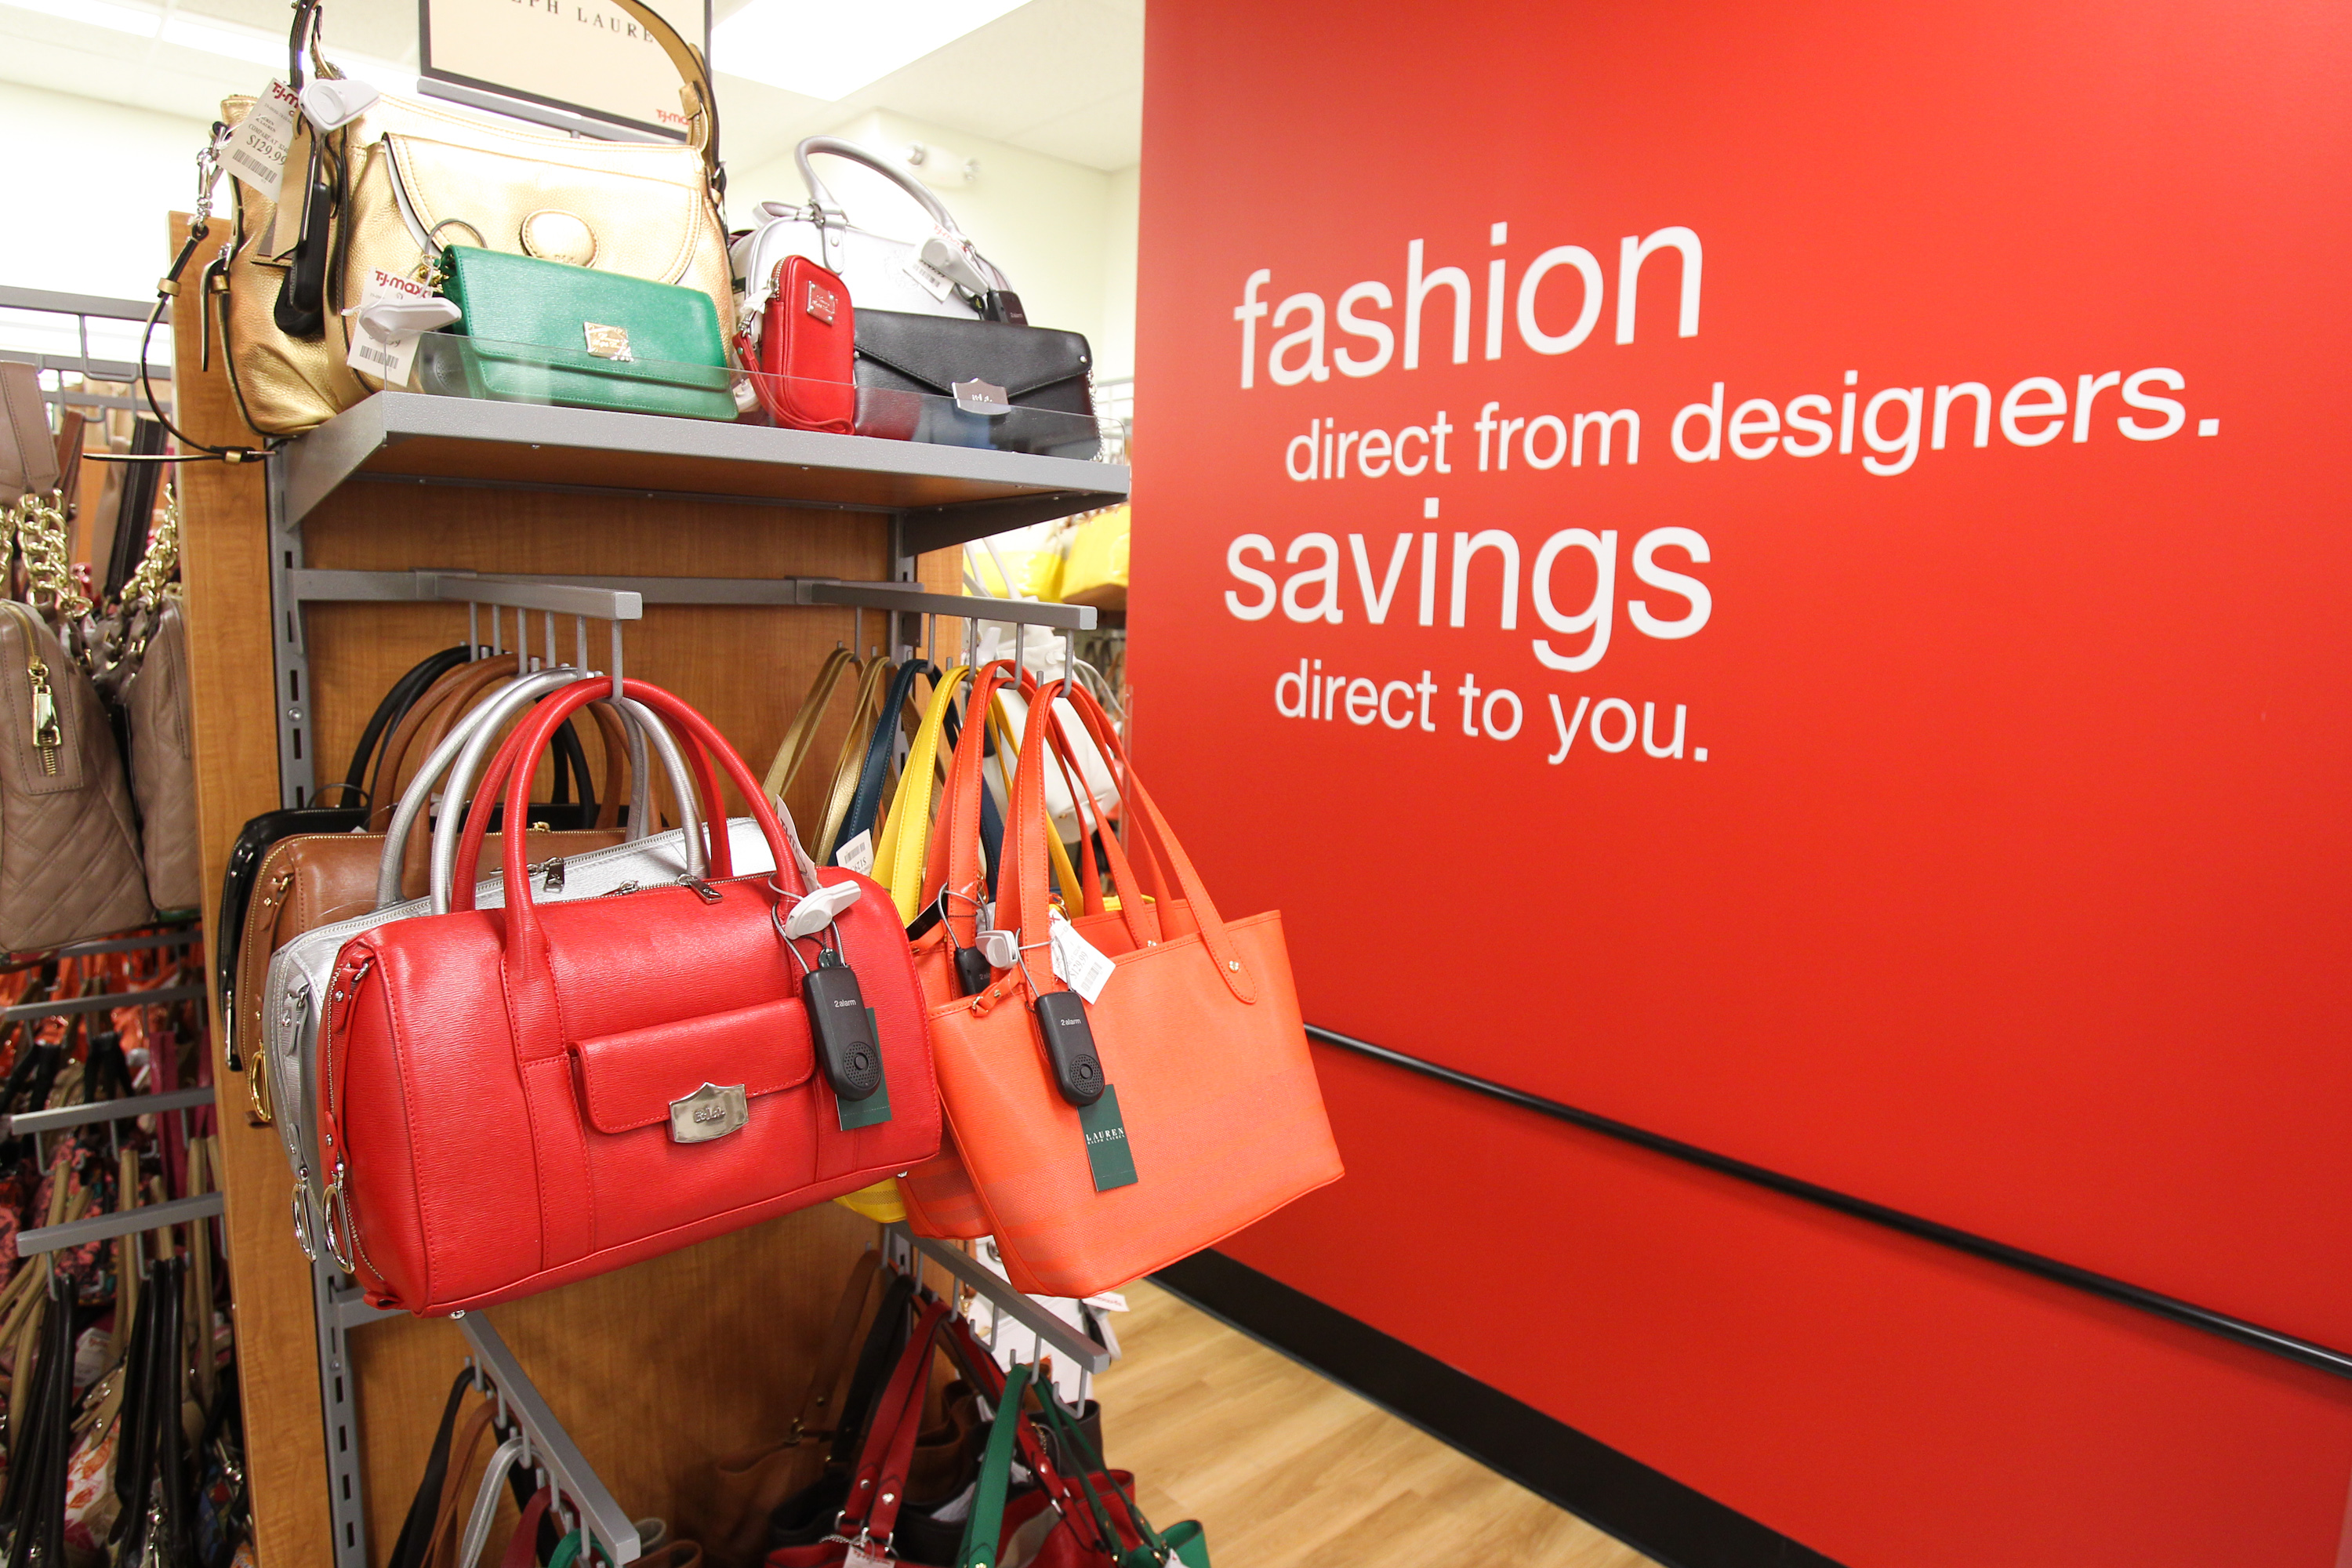 TJ Maxx: Sailing Toward Modern Retail, by IBR Editorial Board, Ivey  Business Review